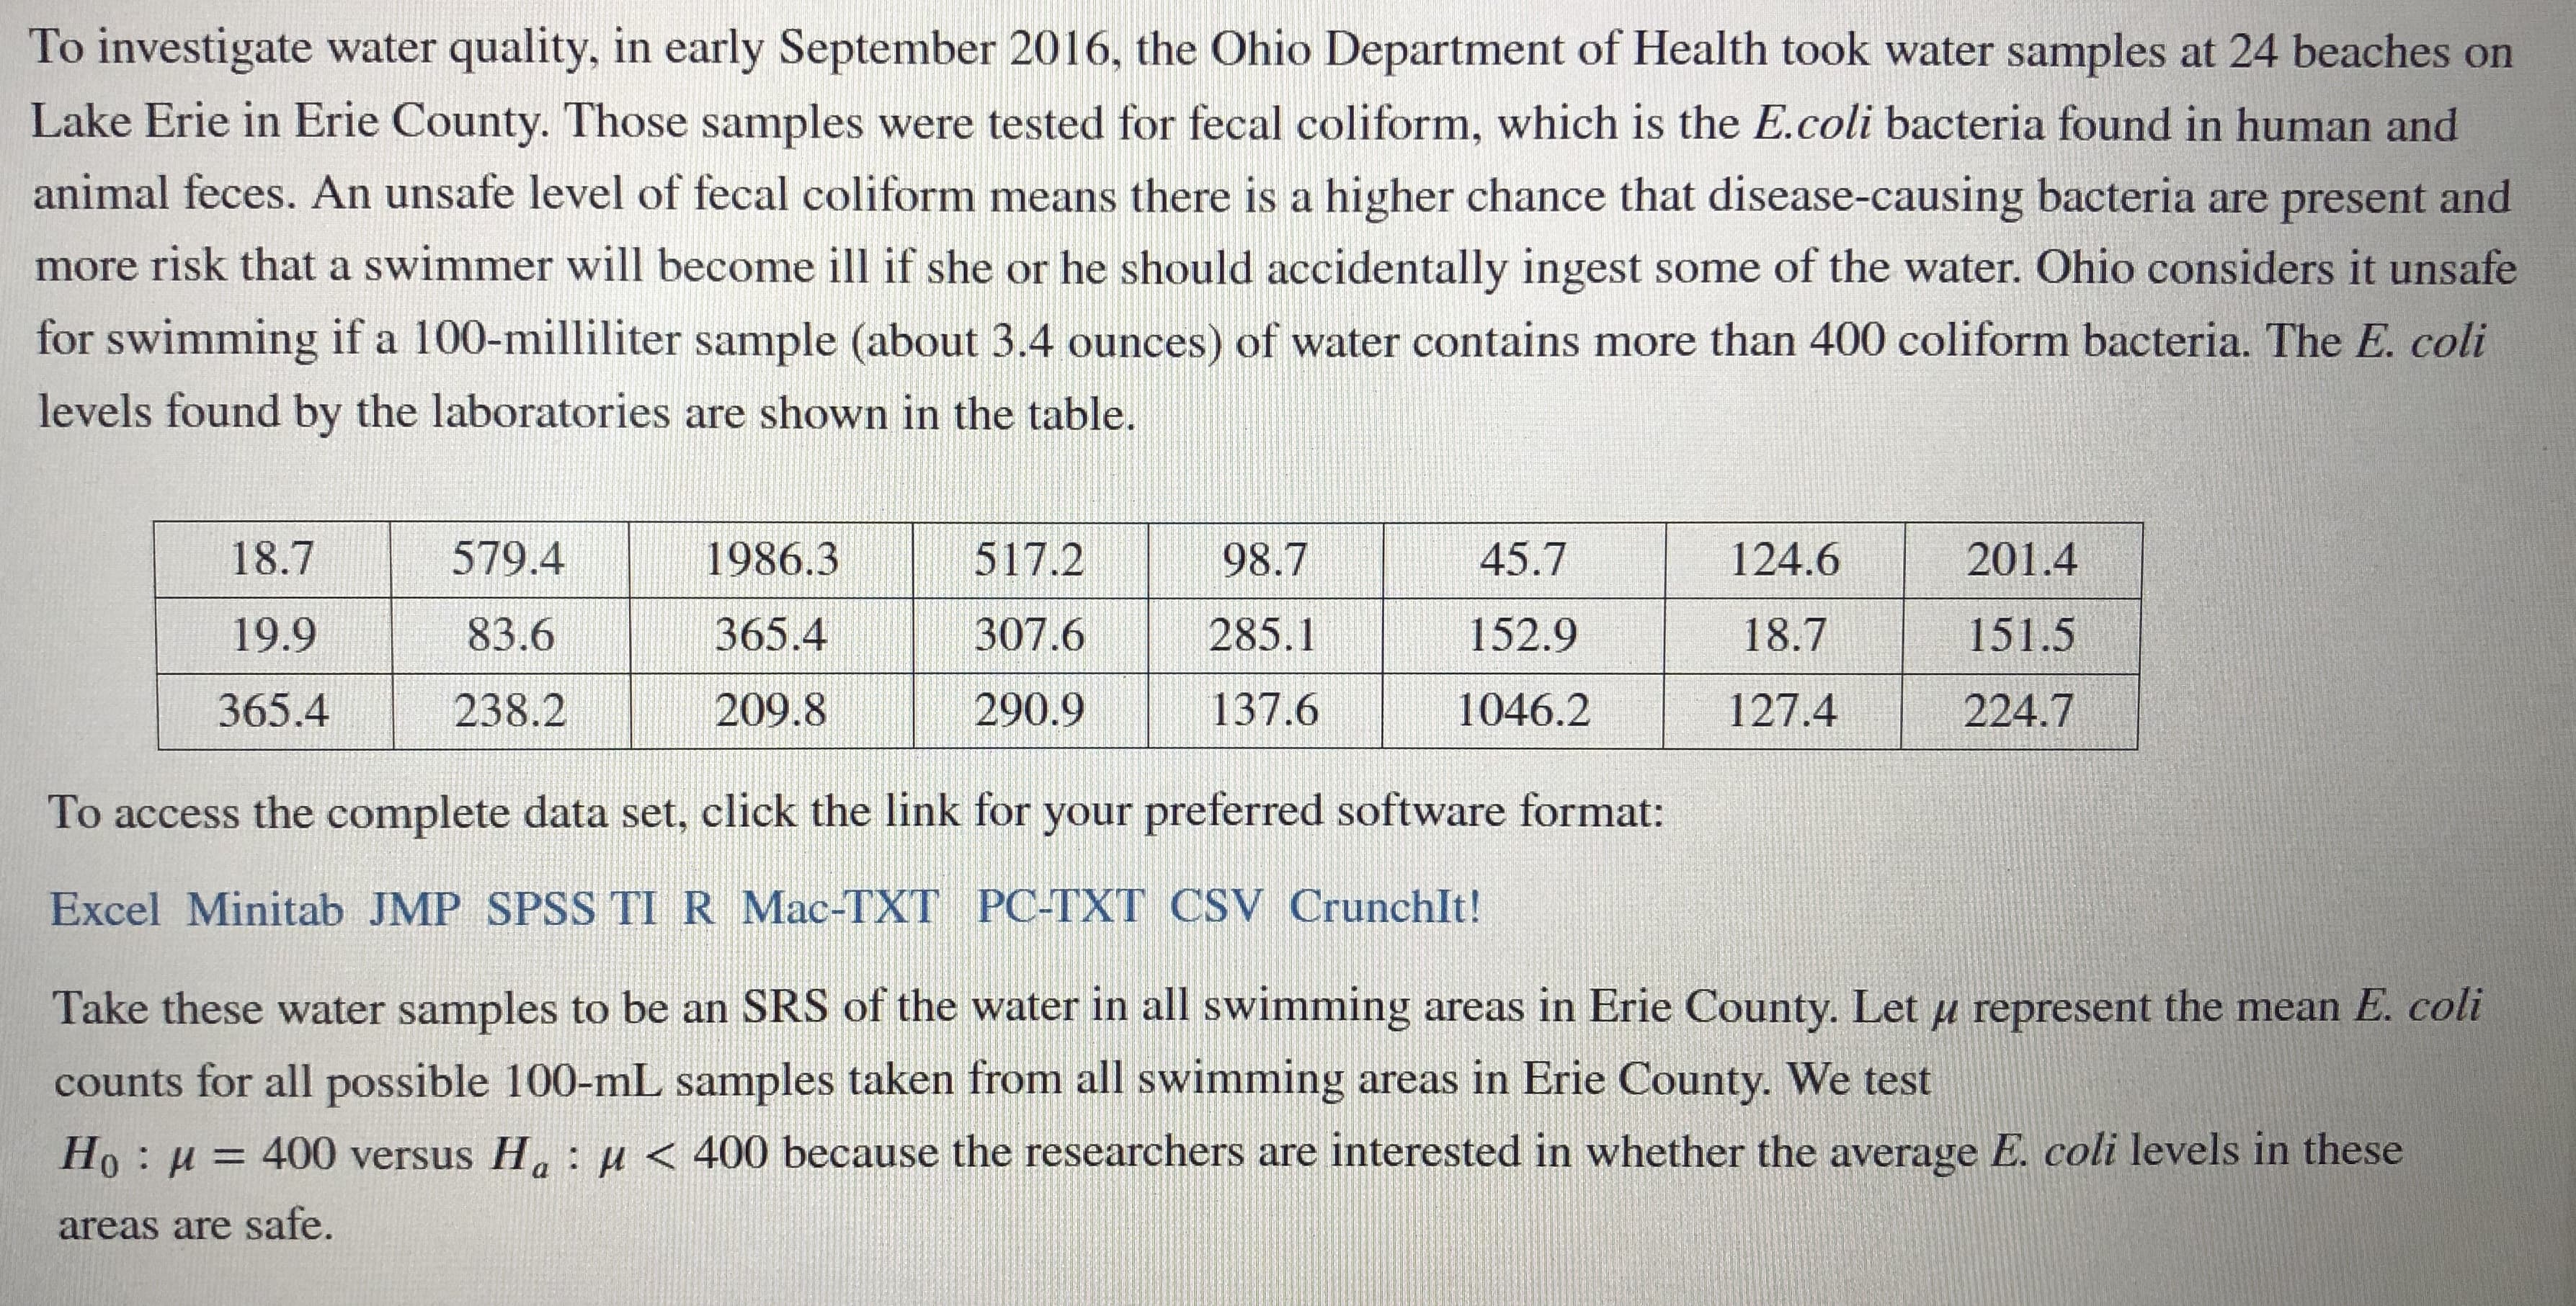 To investigate water quality, in early September 2016, the Ohio Department of Health took water samples at 24 beaches on
Lake Erie in Erie County. Those samples were tested for fecal coliform, which is the E.coli bacteria found in human and
animal feces. An unsafe level of fecal coliform means there is a higher chance that disease-causing bacteria are present and
more risk that a swimmer will become ill if she or he should accidentally ingest some of the water. Ohio considers it unsafe
for swimming if a 100-milliliter sample (about 3.4 ounces) of water contains more than 400 coliform bacteria. The E. coli
levels found by the laboratories are shown in the table.
18.7
579.4
1986.3
517.2
98.7
45.7
124.6
201.4
19.9
83.6
365.4
307.6
285.1
152.9
18.7
151.5
365.4
238.2
209.8
290.9
137.6
1046.2
127.4
224.7
To access the complete data set, click the link for your preferred software format:
Excel Minitab JMP SPSS TI R Mac-TXT PC-TXT CSV Crunchlt!
Take these water samples to be an SRS of the water in all swimming areas in Erie County. Let u represent the mean E. coli
counts for all possible 100-mL samples taken from all swimming areas in Erie County. We test
Ho: u = 400 versus H. : u < 400 because the researchers are interested in whether the average E. coli levels in these
areas are safe.
